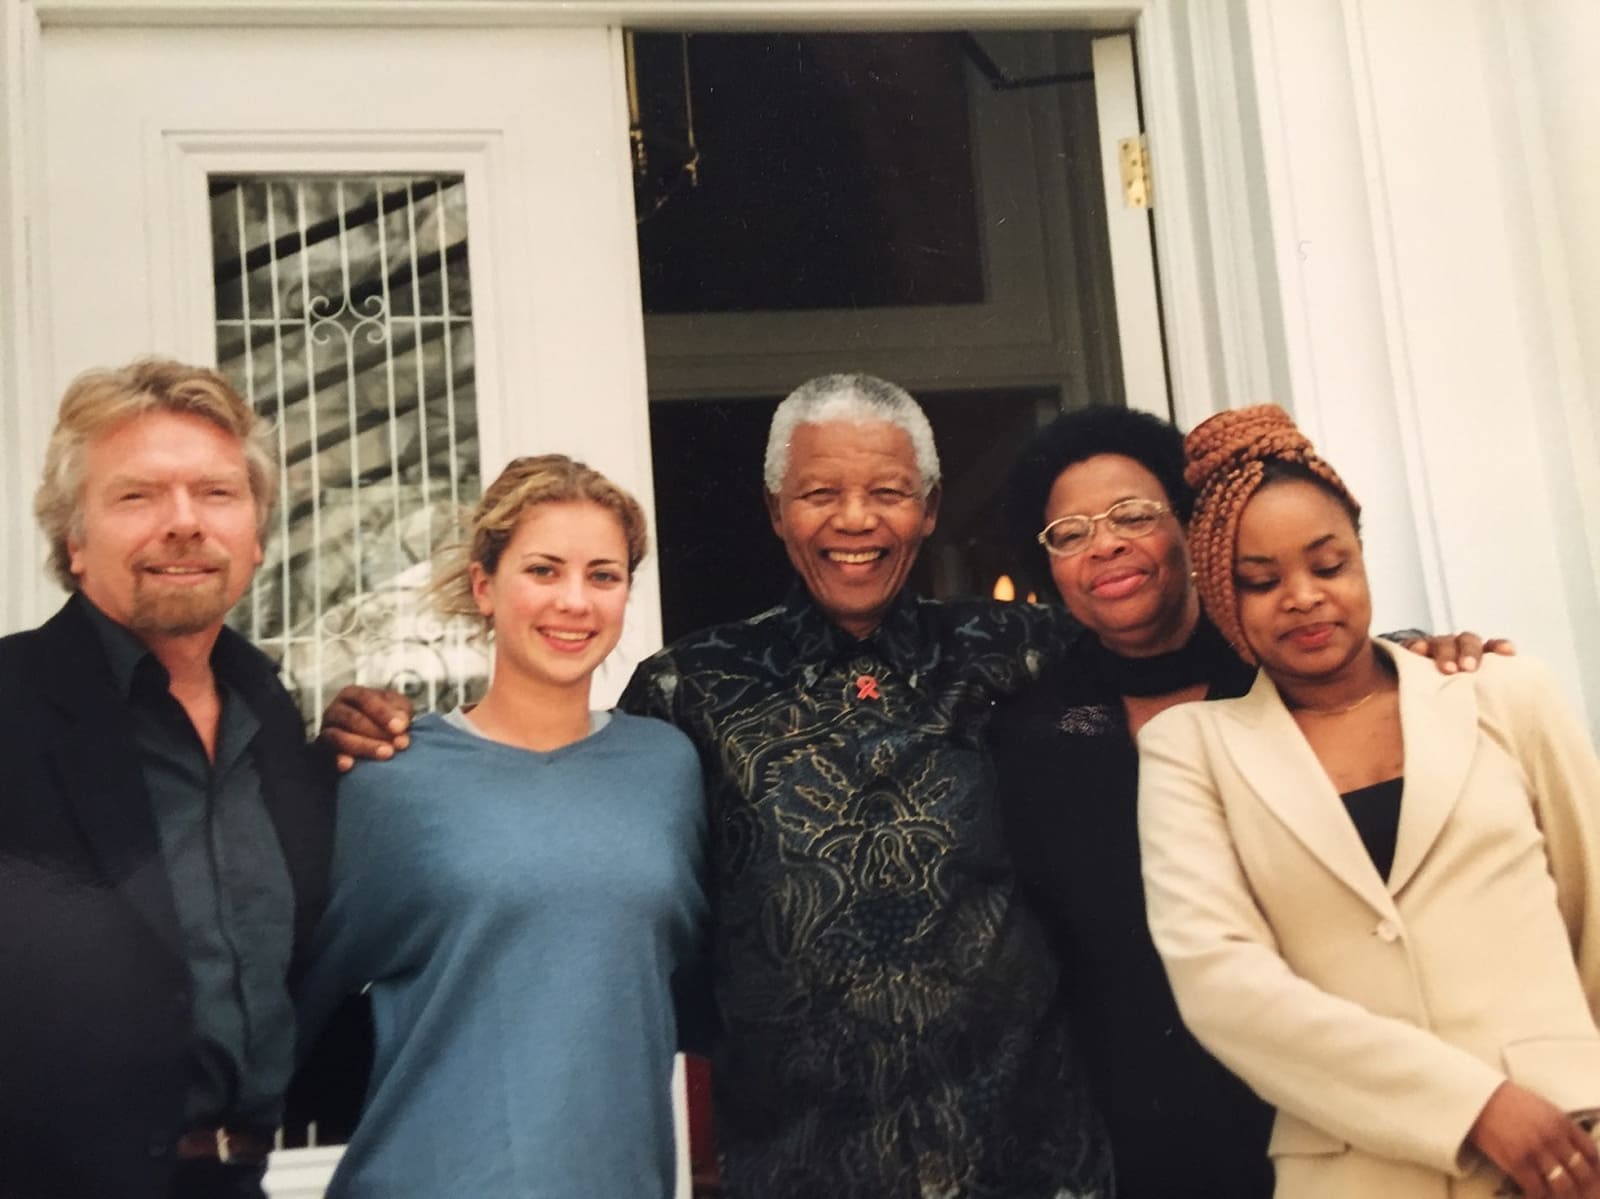 Richard, Holly and Nelson Mandela and family standing outside together